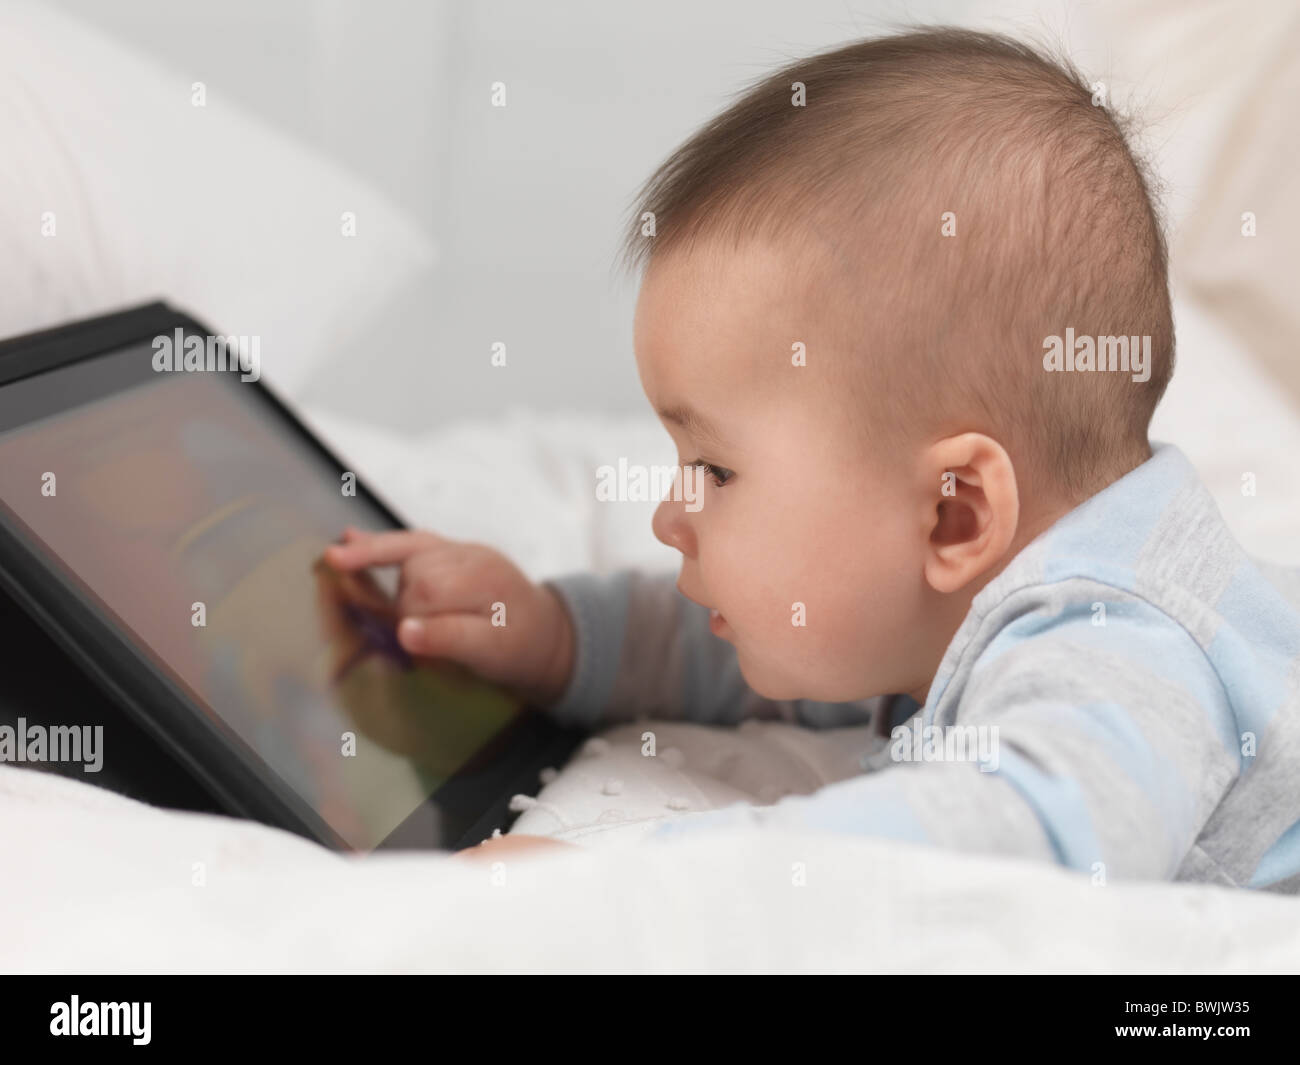 Six month old baby boy playing with a tablet computer Stock Photo